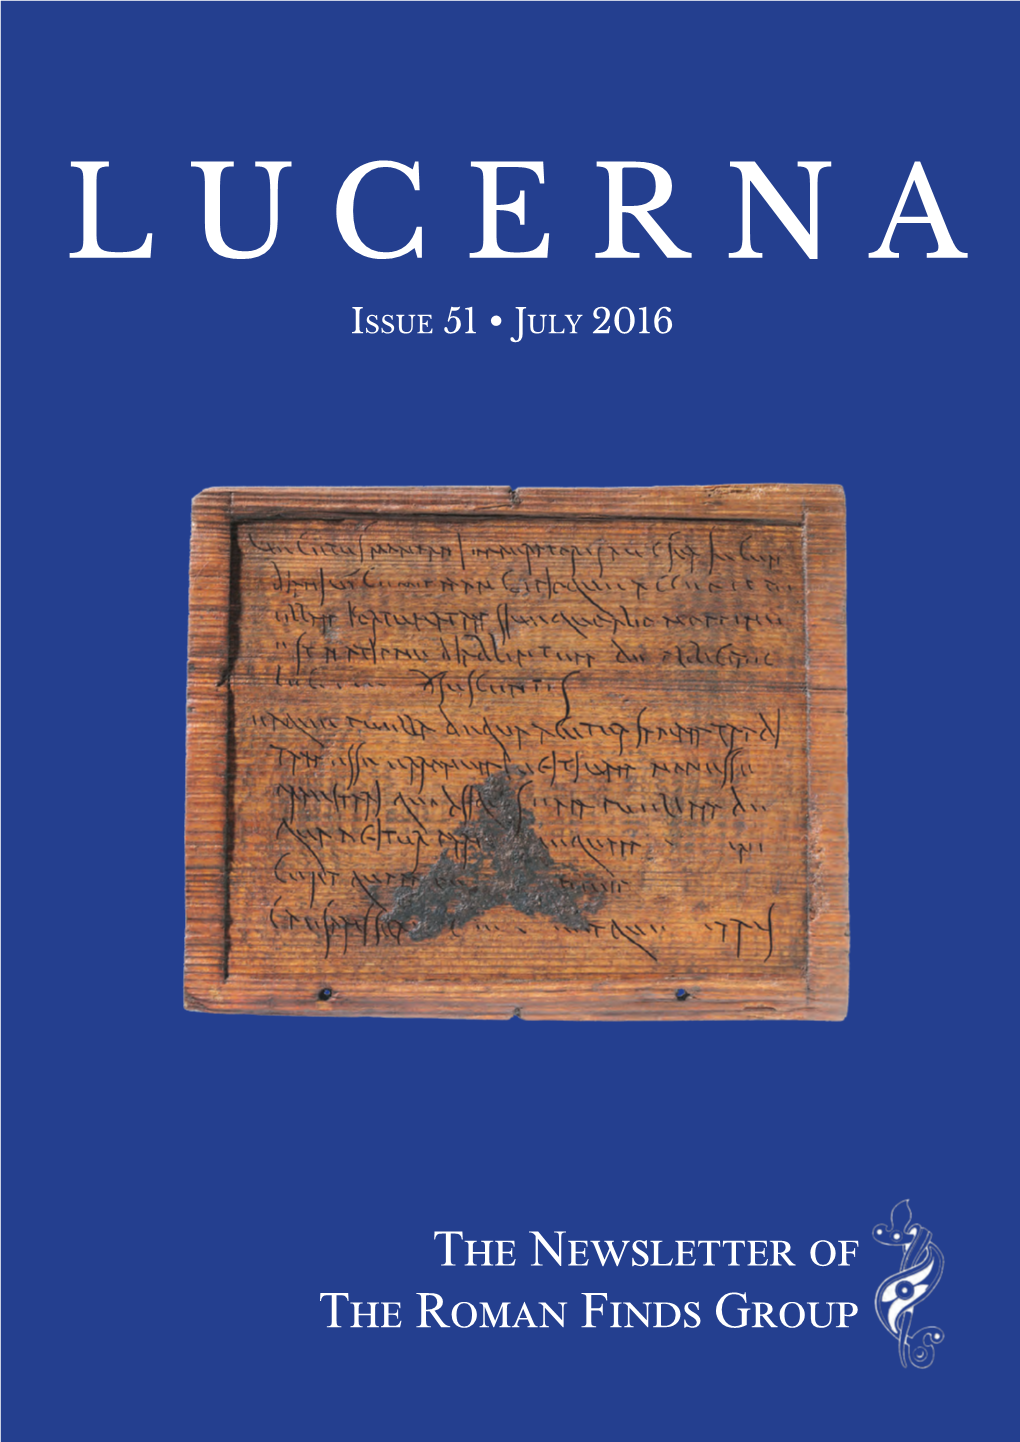 The Newsletter of the Roman Finds Group LUCERNA: the NEWSLETTER of the ROMAN FINDS GROUP ISSUE 51, JULY 2016